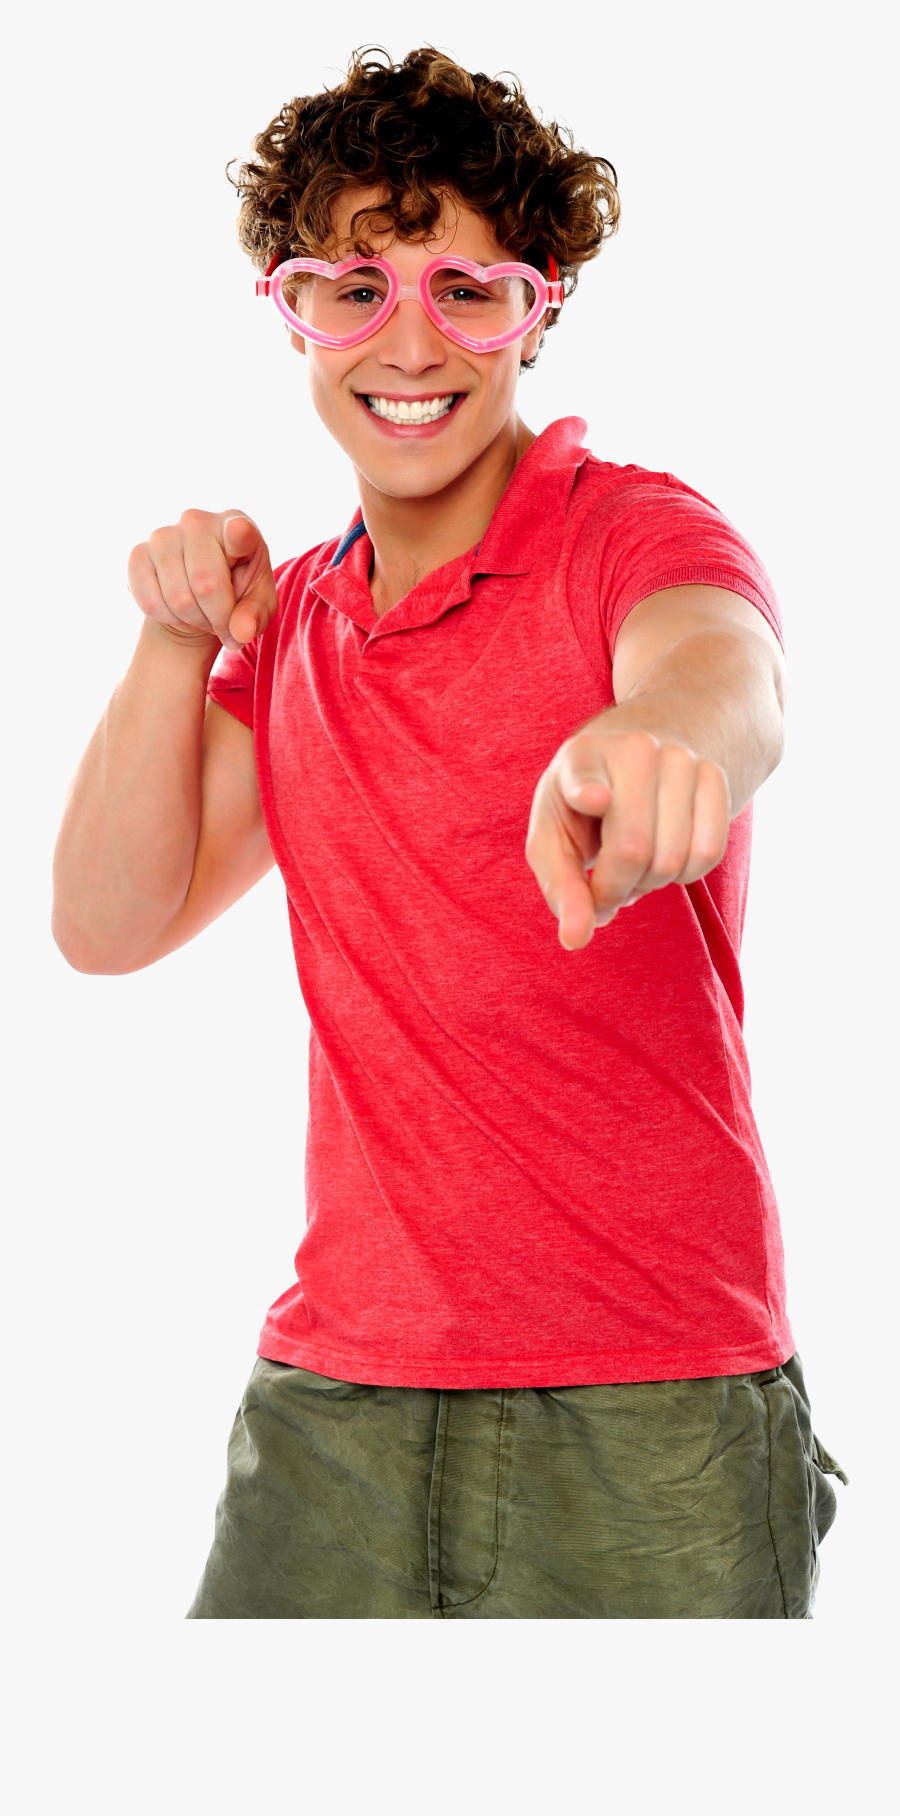 Guy Pointing Png - Man Pointing In Front Png, Transparent Clipart